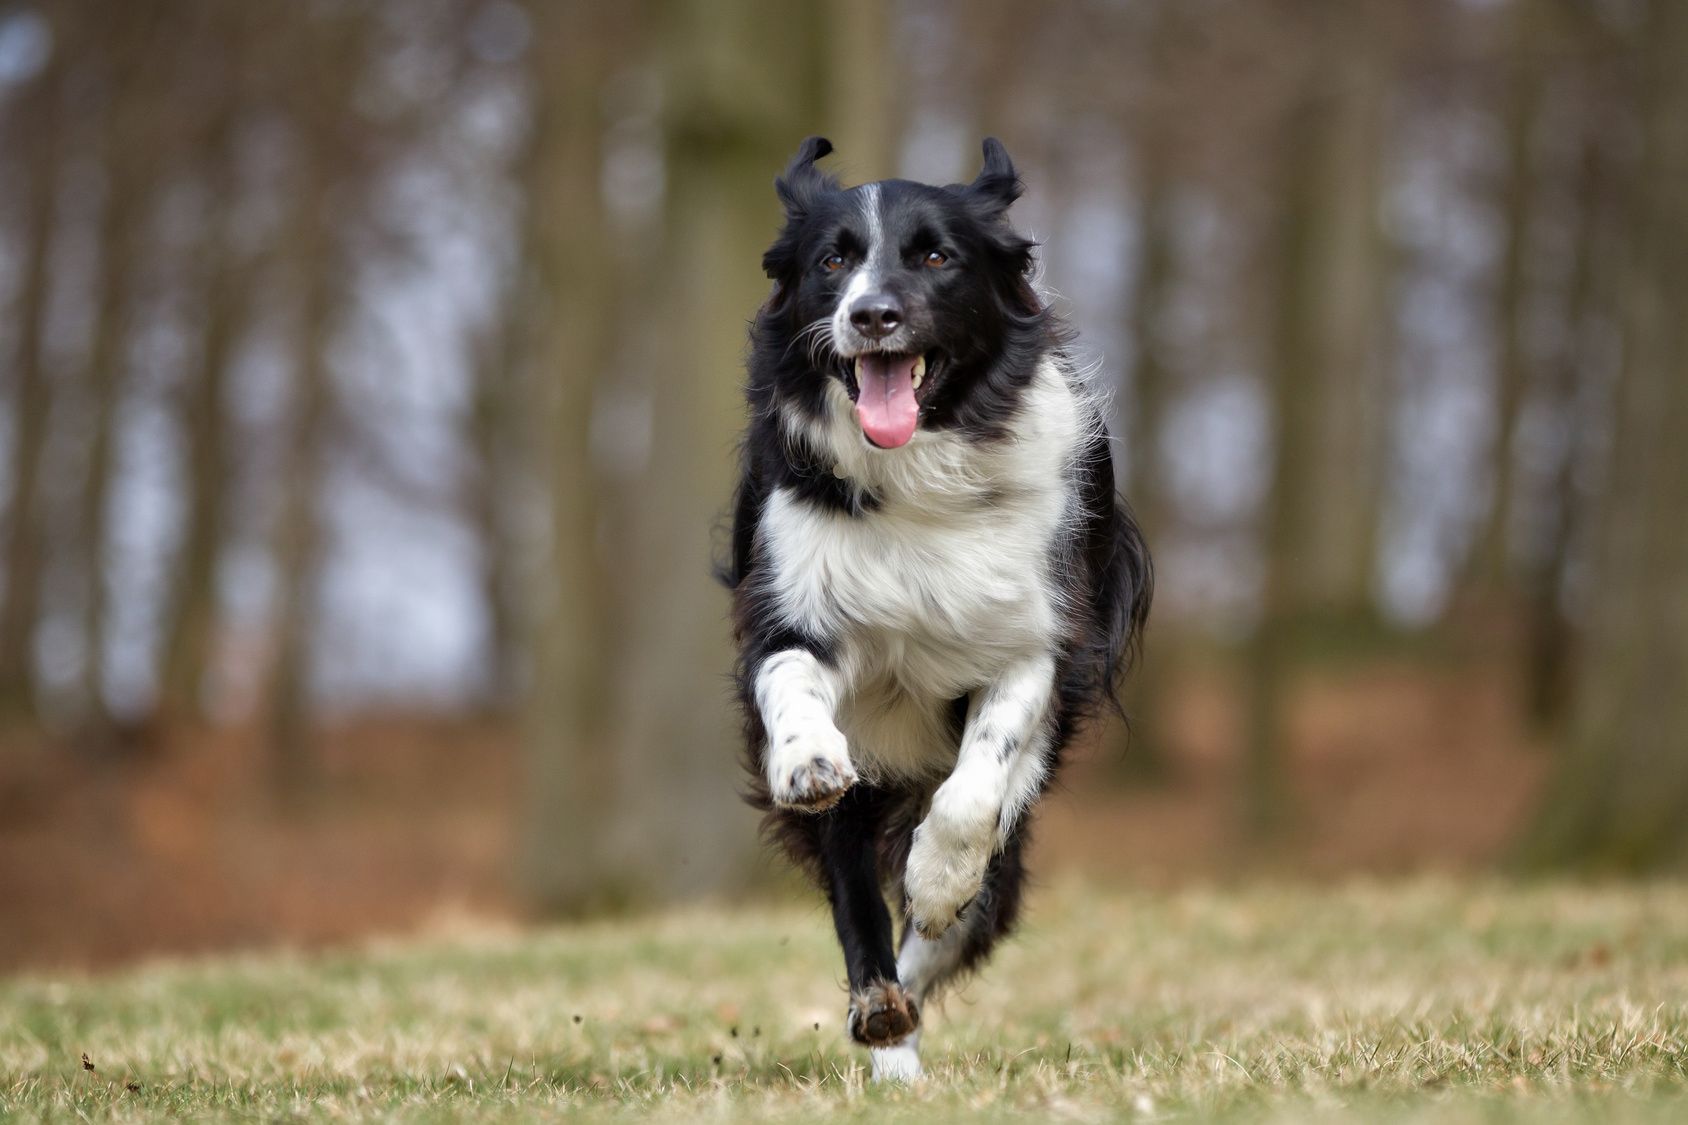 A purebred Border Collie dog without leash outdoors in the nature on a sunny day.